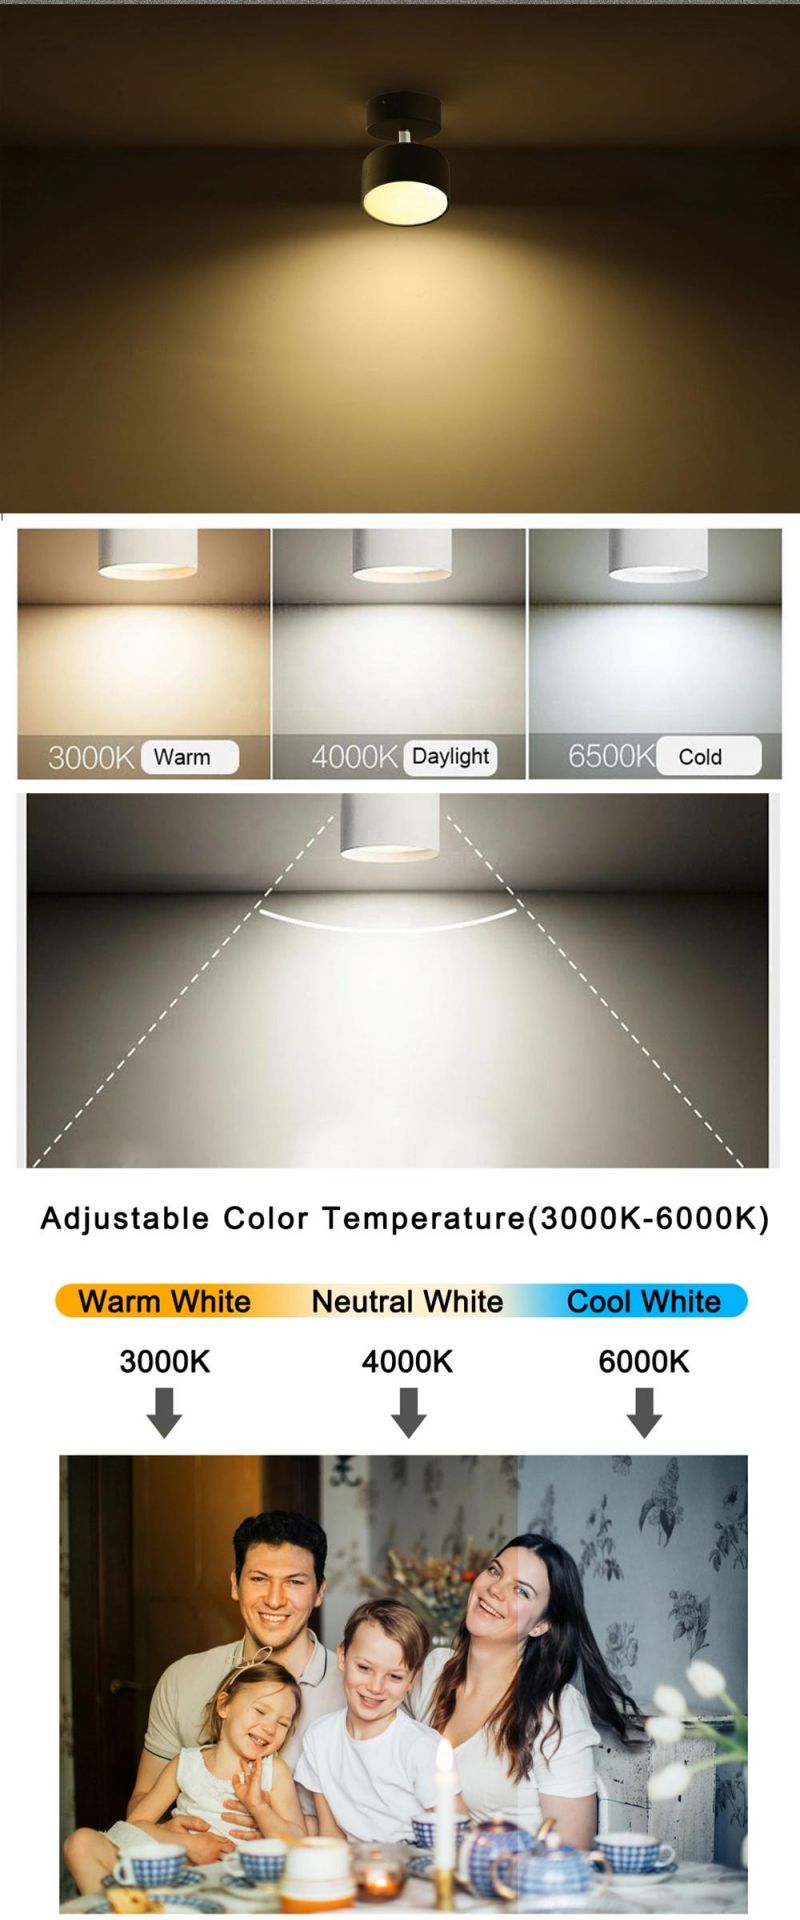 How Bright Surface Mounted LED Ceiling Lamp Metal LED Modern Simple Ceiling Spotlight Fixture White Gx53 LED Indoor Spotlight